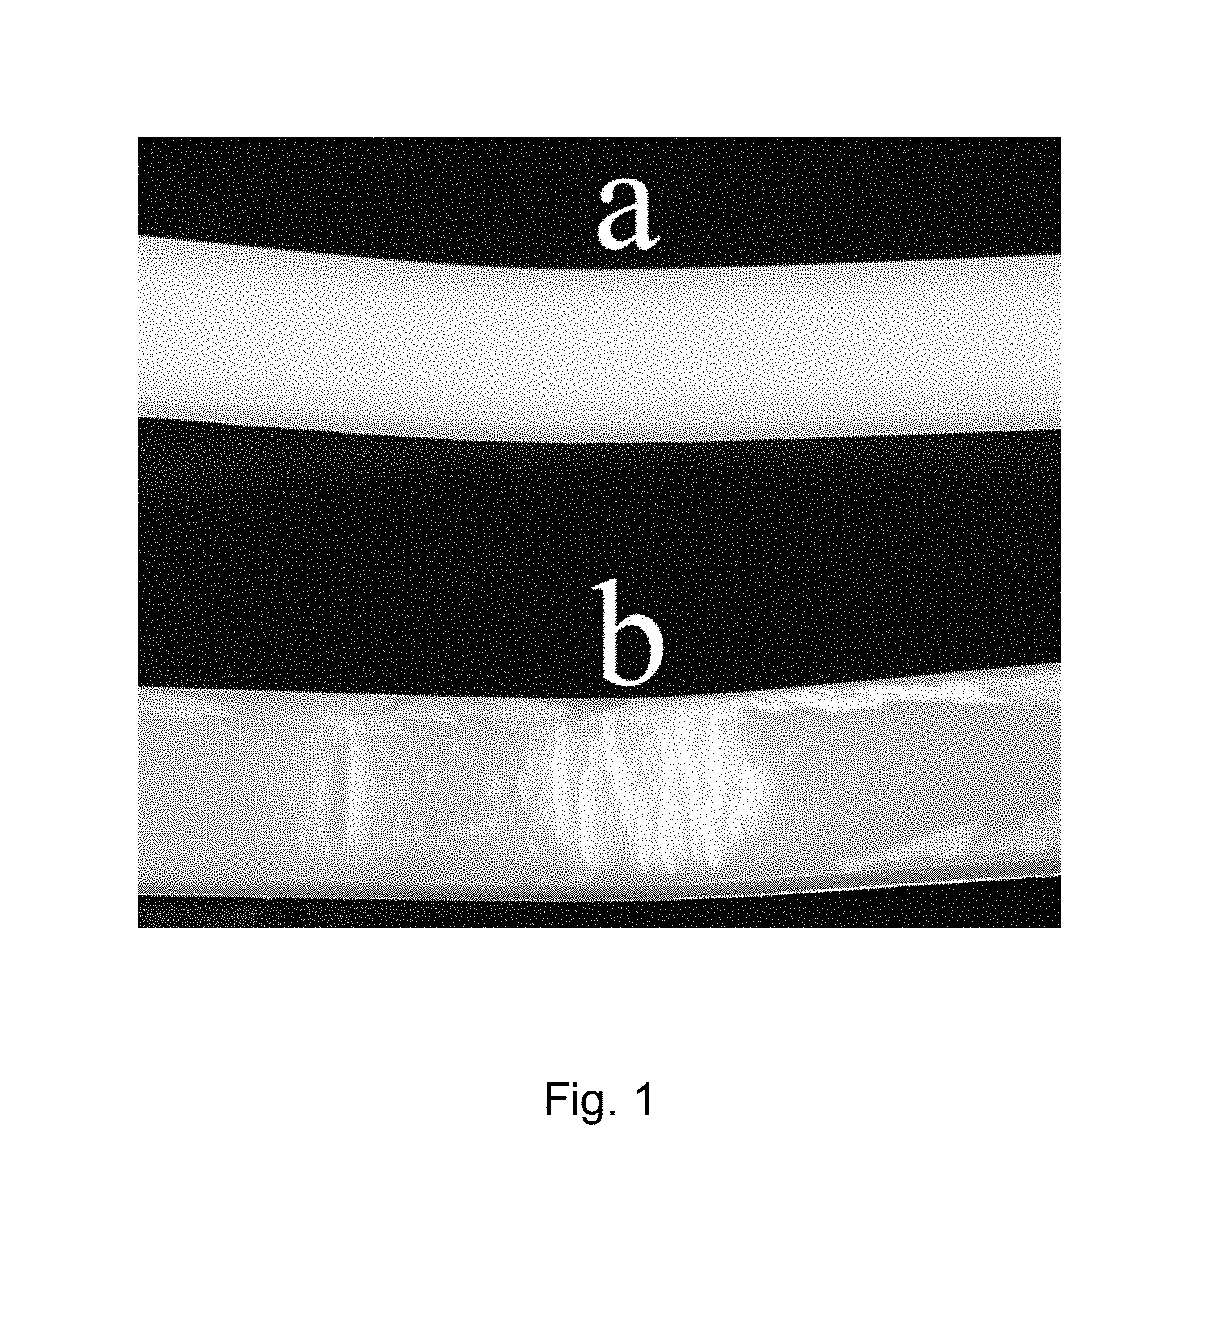 Biocarbon and nylon based hybrid carbonaceous biocomposites and methods of making those and using thereof